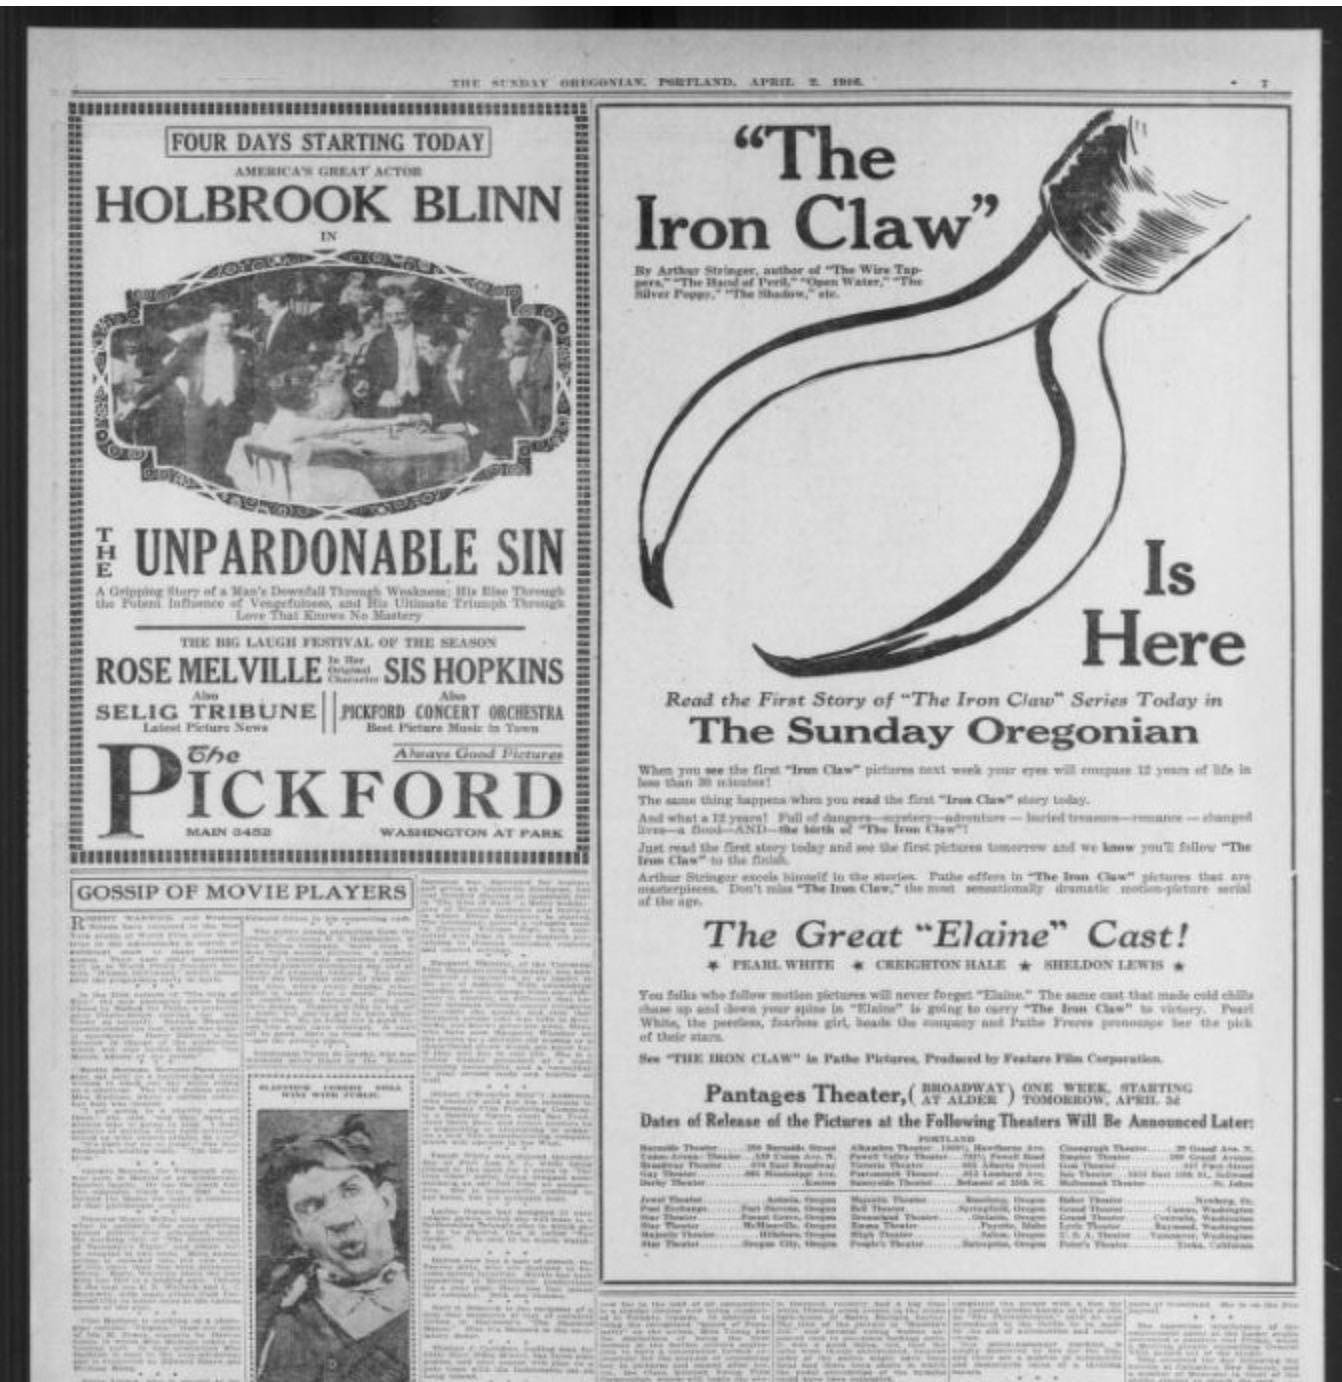 Pantages Theater ad, 1916